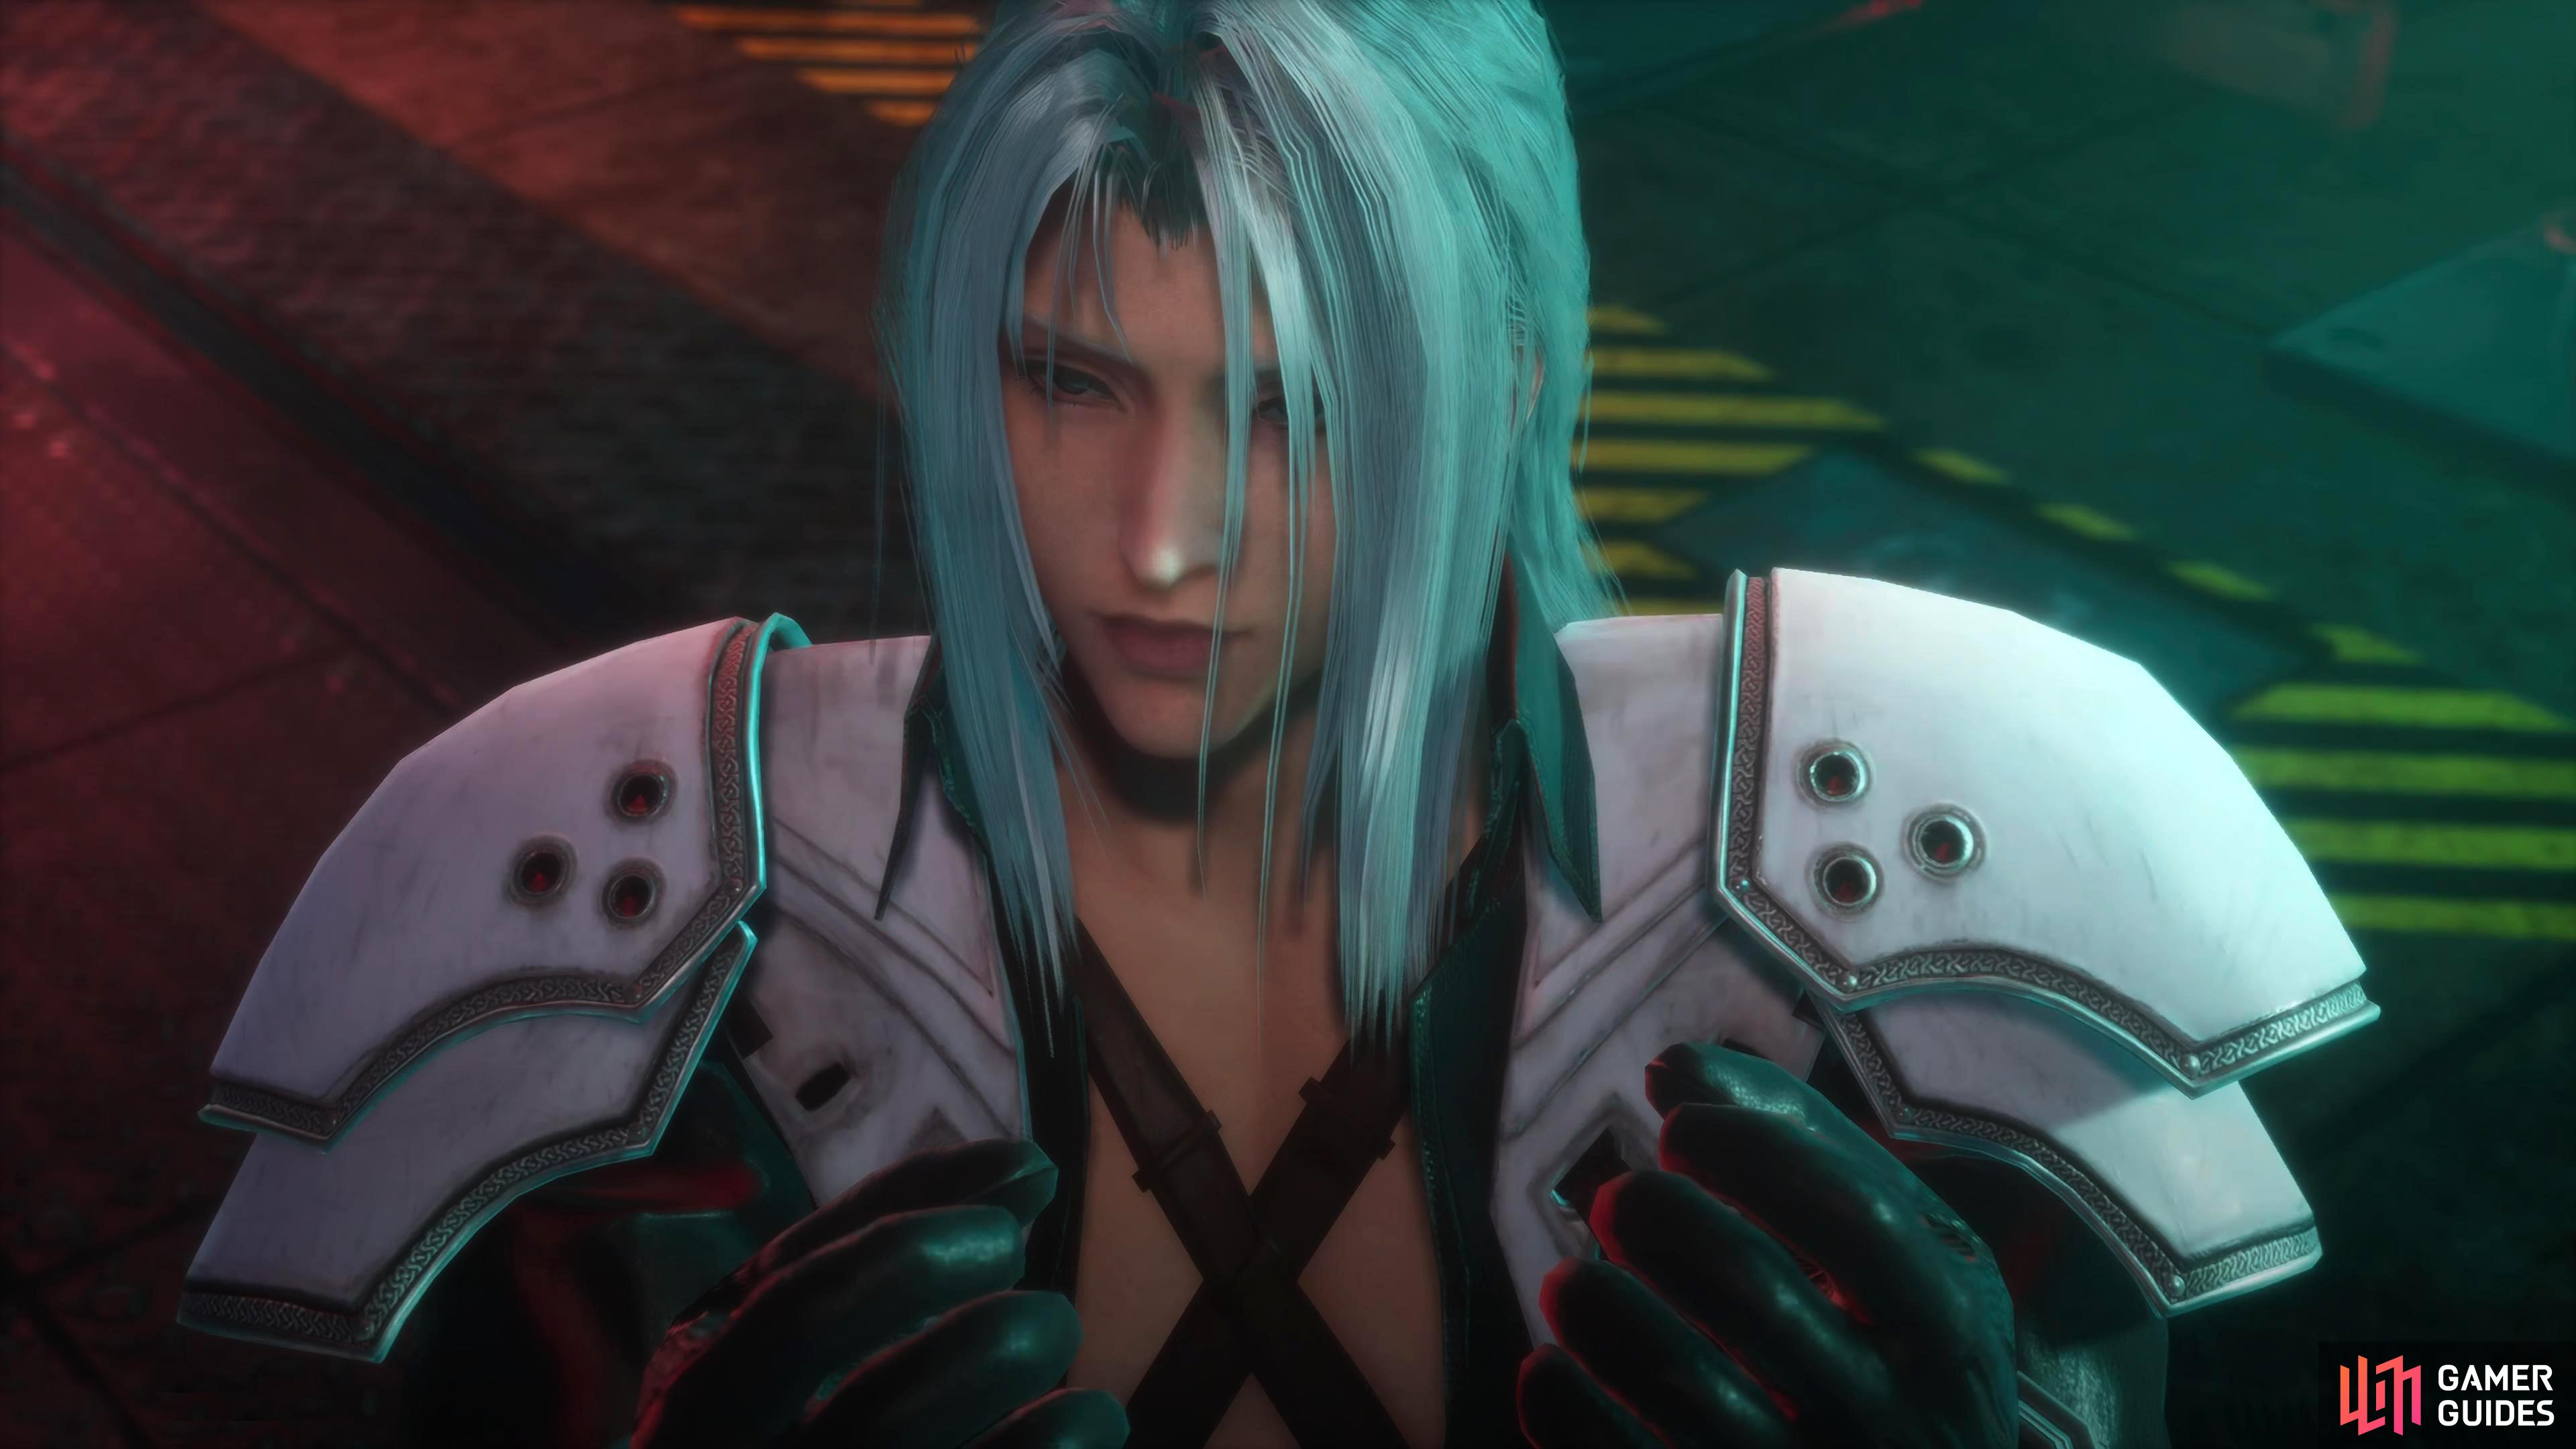 It looks like Sephiroth has found out some bad news.